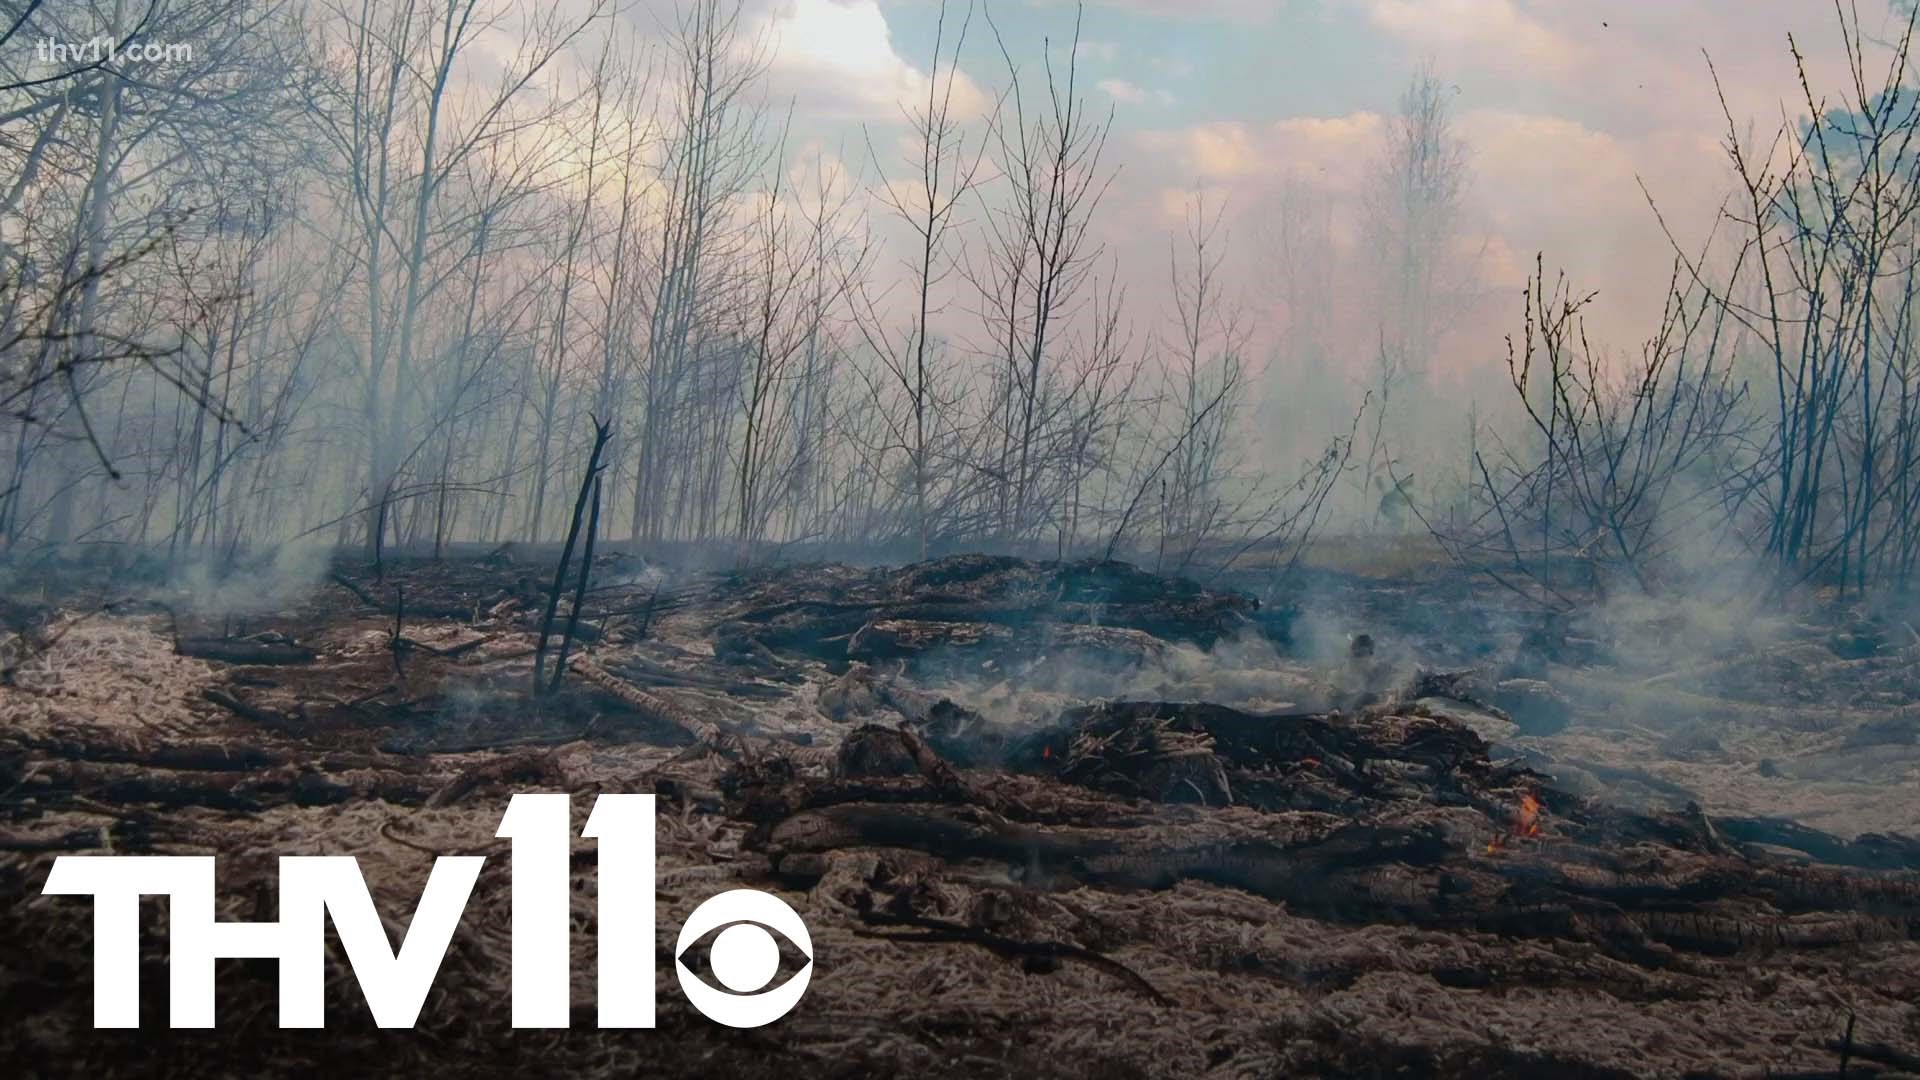 With summertime comes wildfire season in Arkansas— and the fire risk is growing thanks to a recent dry spell. Here's how you can stay safe and reduce danger.